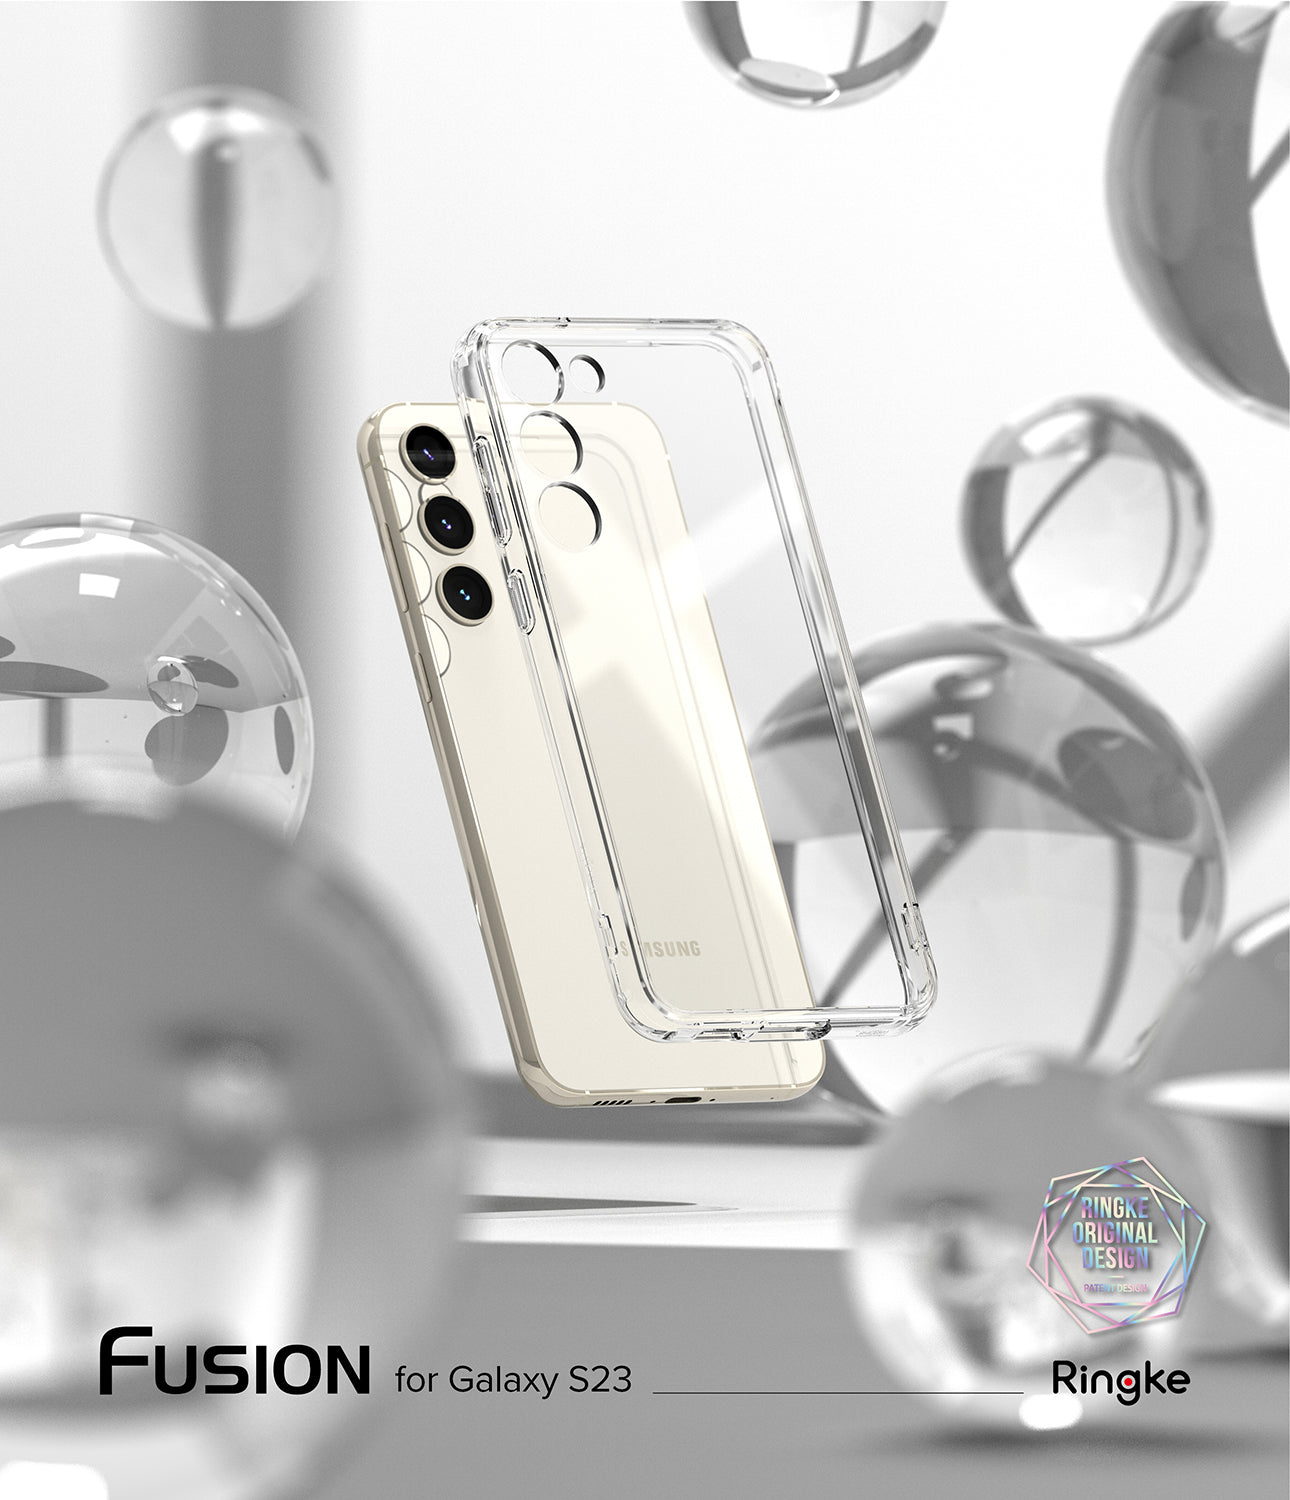 Fusion for Galaxy S23 - Ringke